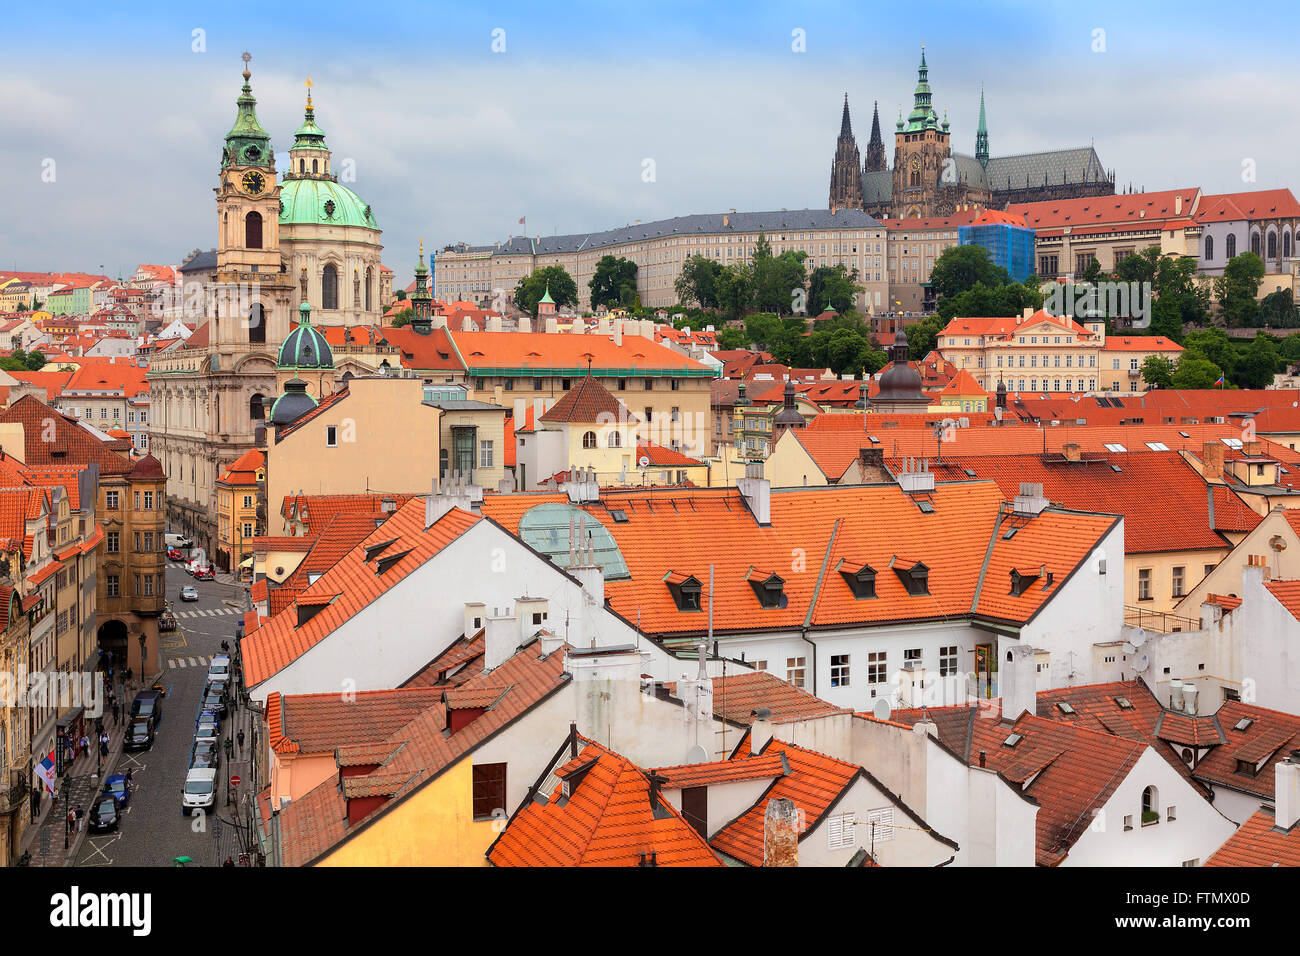 Mostecka street view of Prague from the Tower on Charles Bridge. Stock Photo